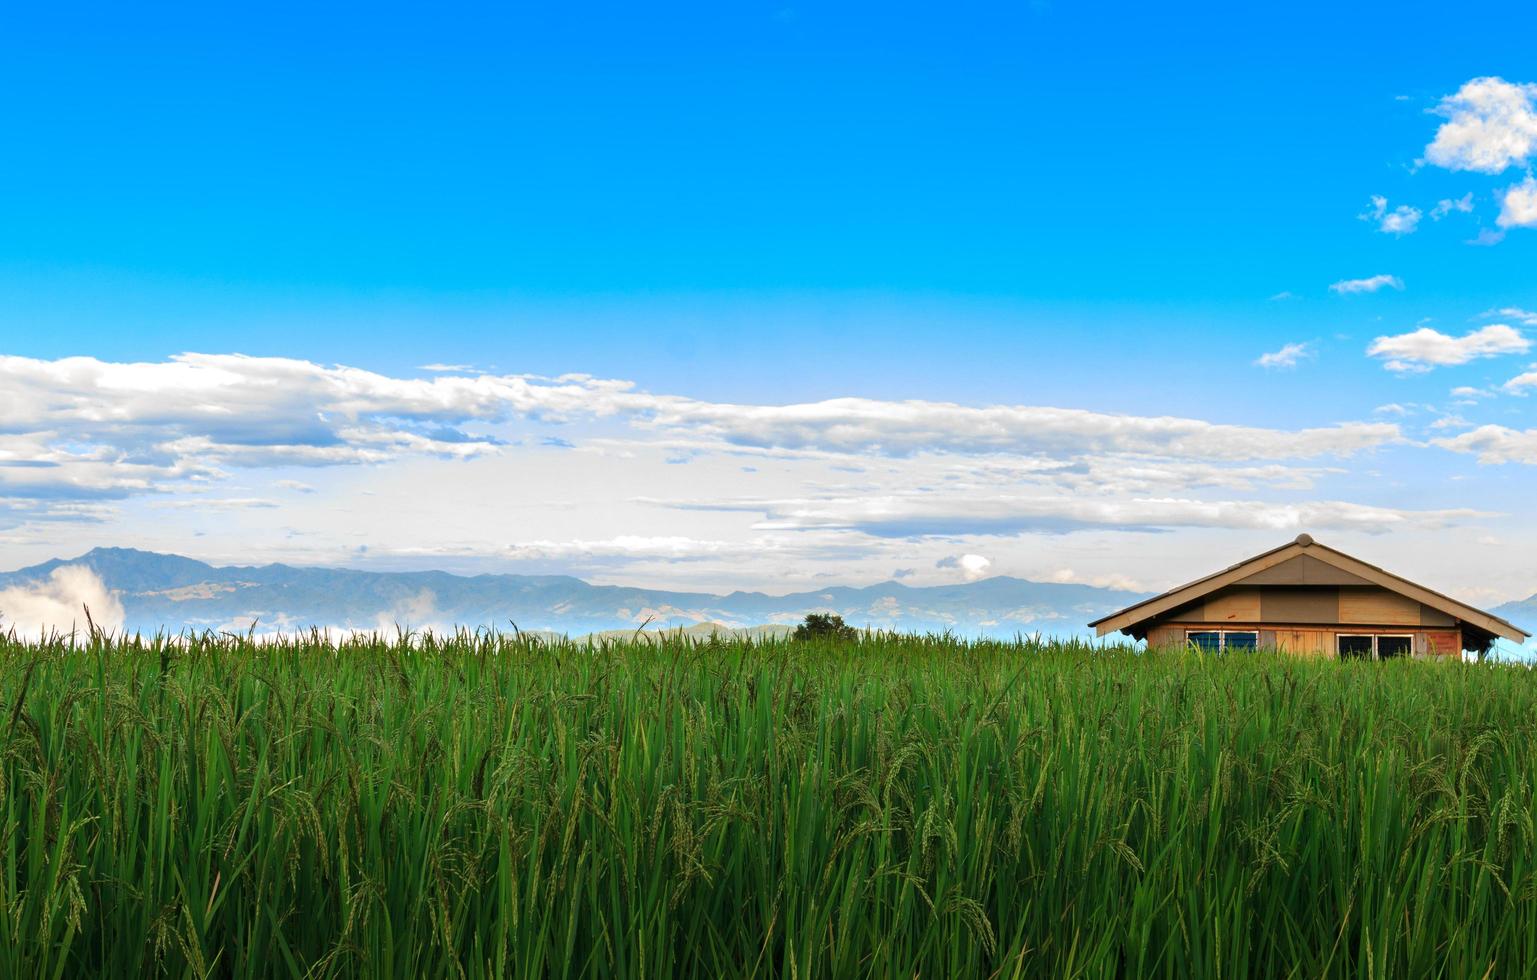 Small houses, rice fields and beautiful nature in the valley. Background image of serenity photo